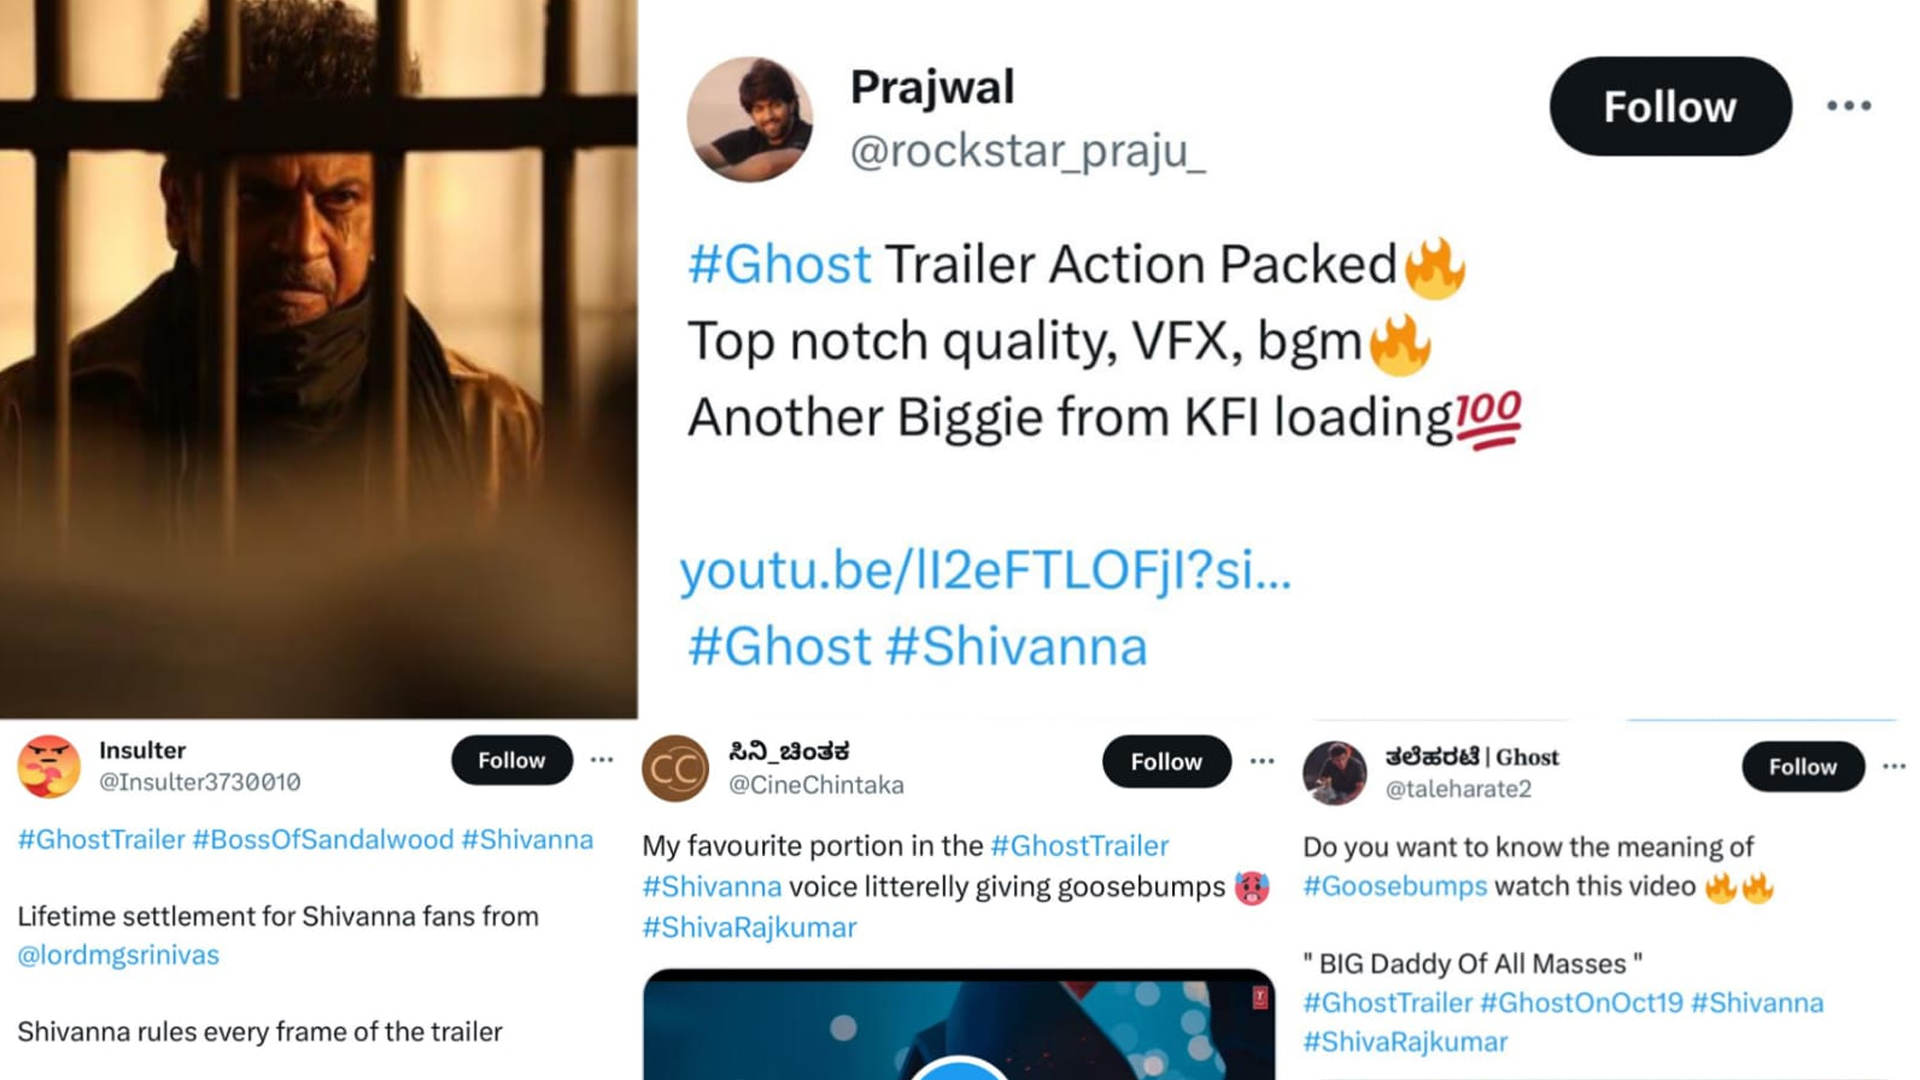 Dr. Shiva Rajkumar’s trailer of Ghost receives huge applause from industry stalwarts and netizens